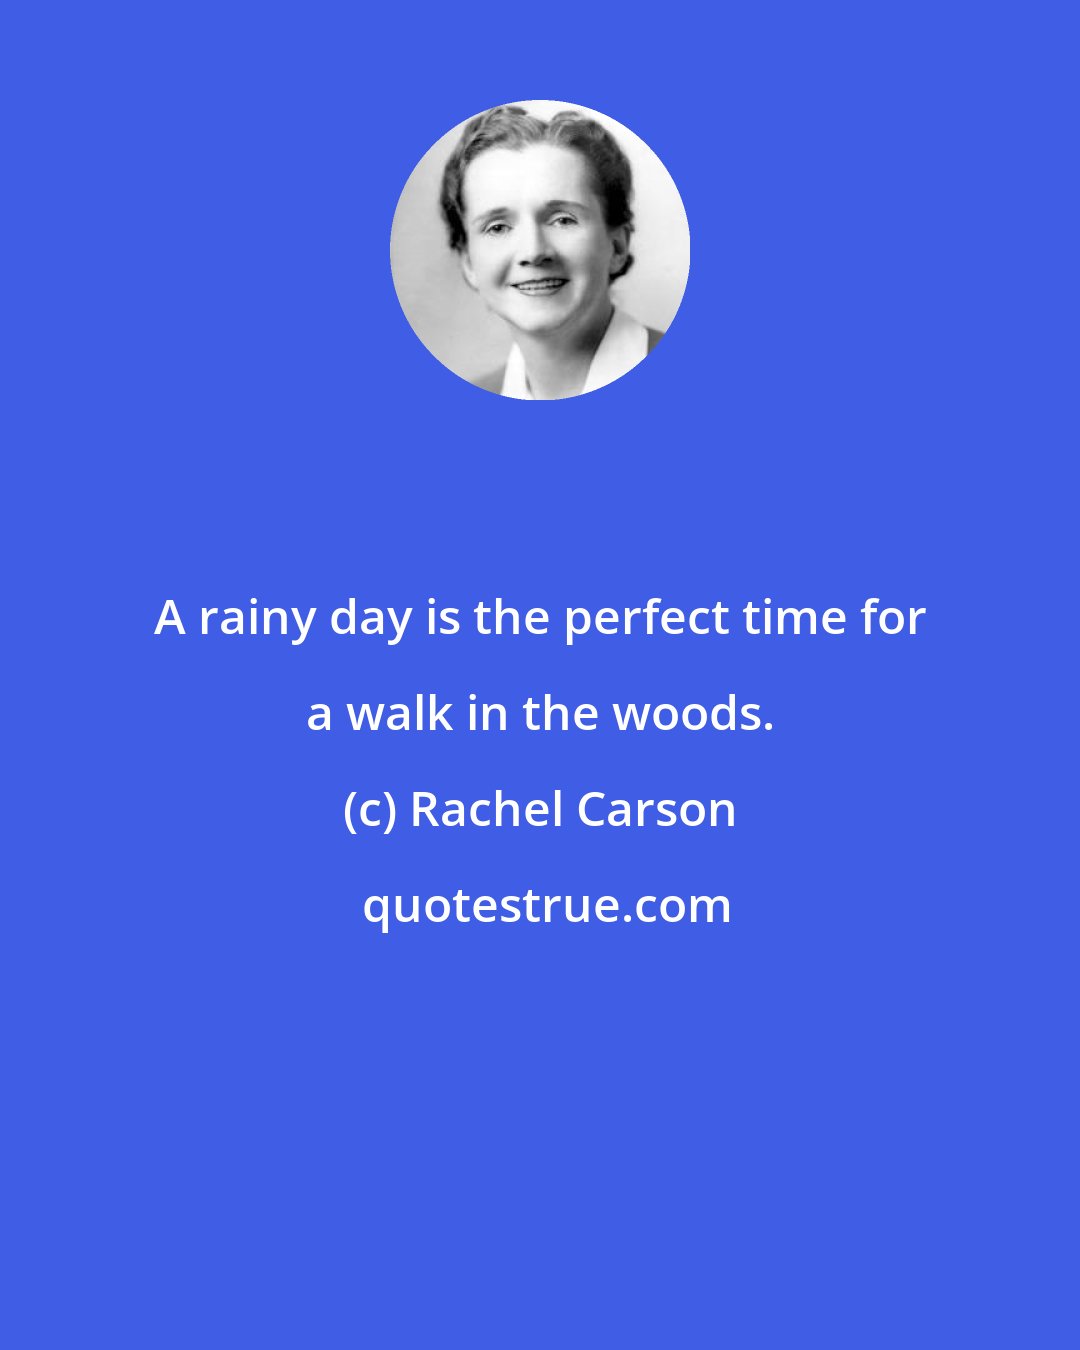 Rachel Carson: A rainy day is the perfect time for a walk in the woods.